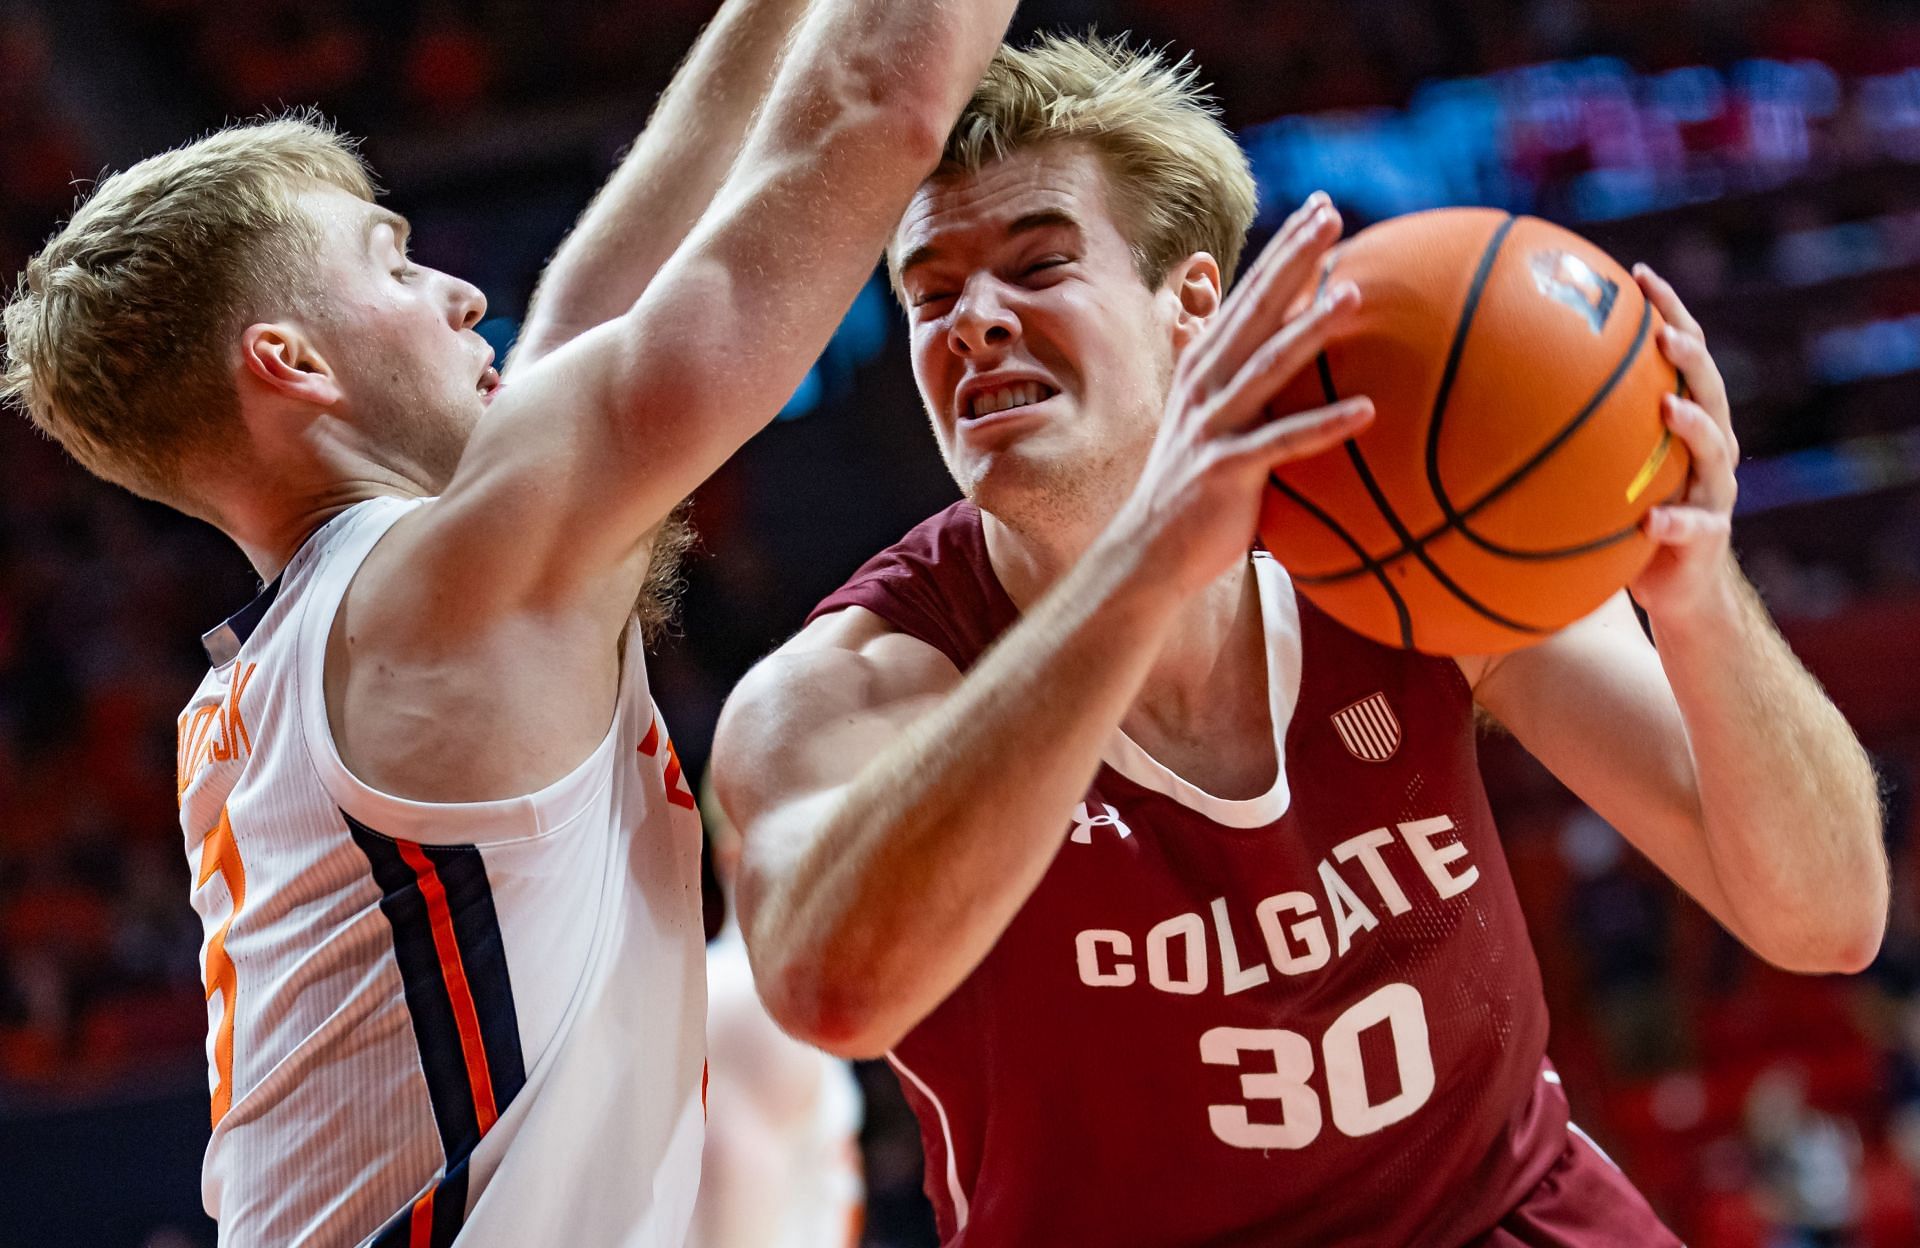 One of the longest March Madness streaks belongs to Colgate.